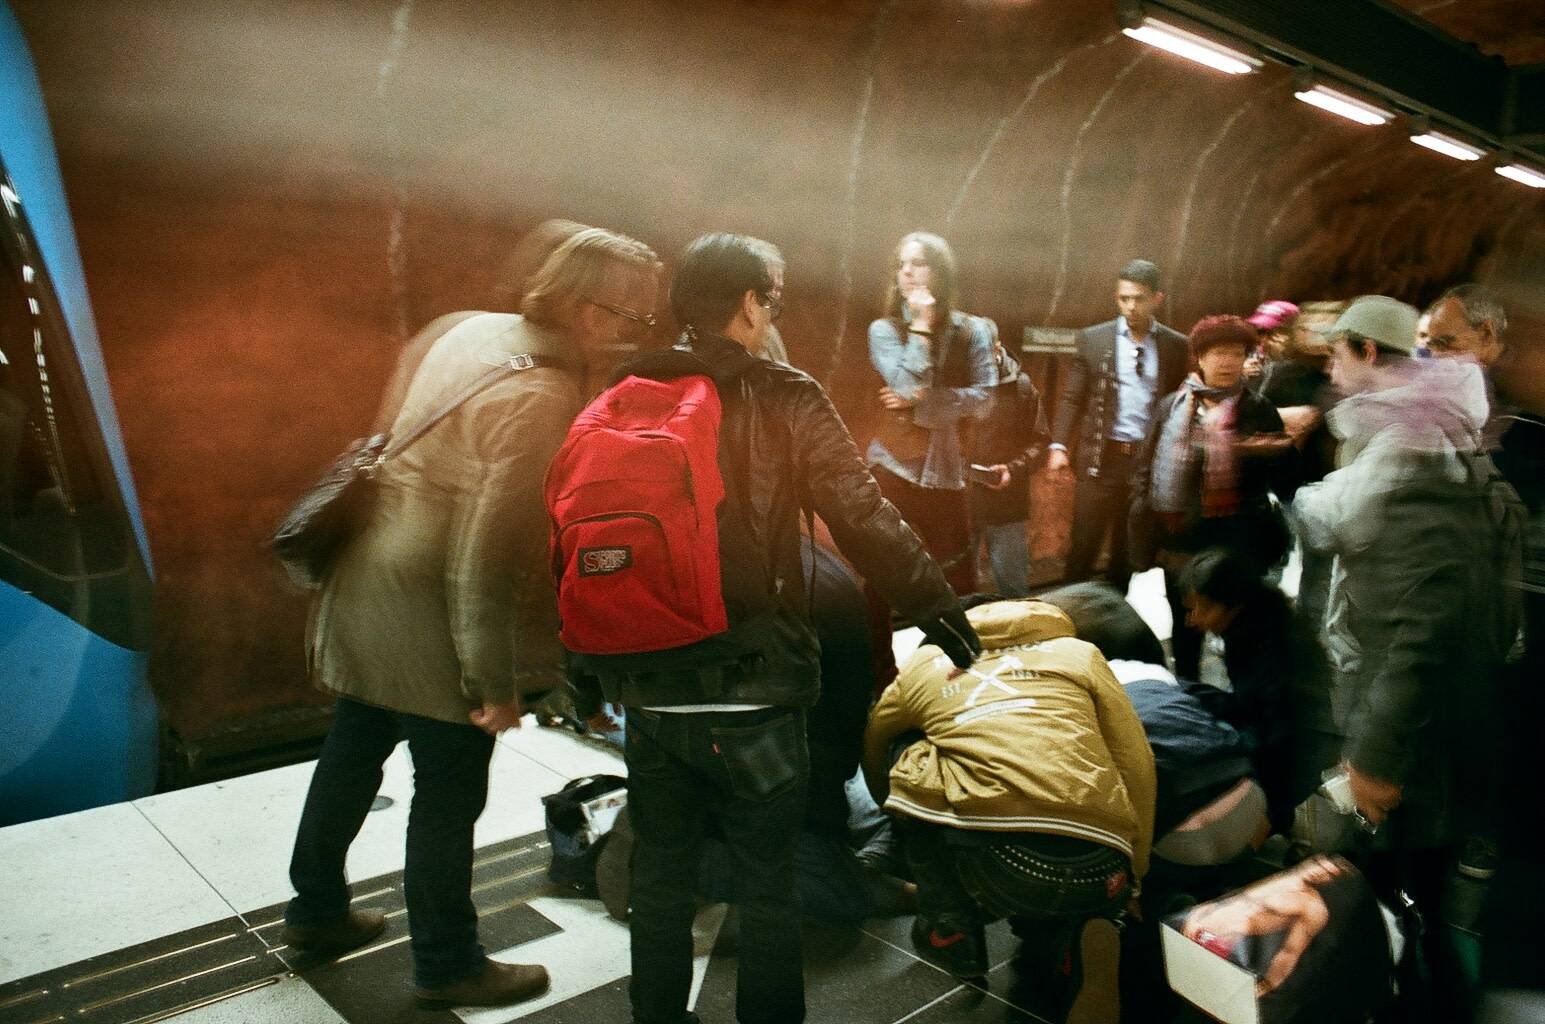 blurry figures of anxious people surrounding the injured man in the subway accident